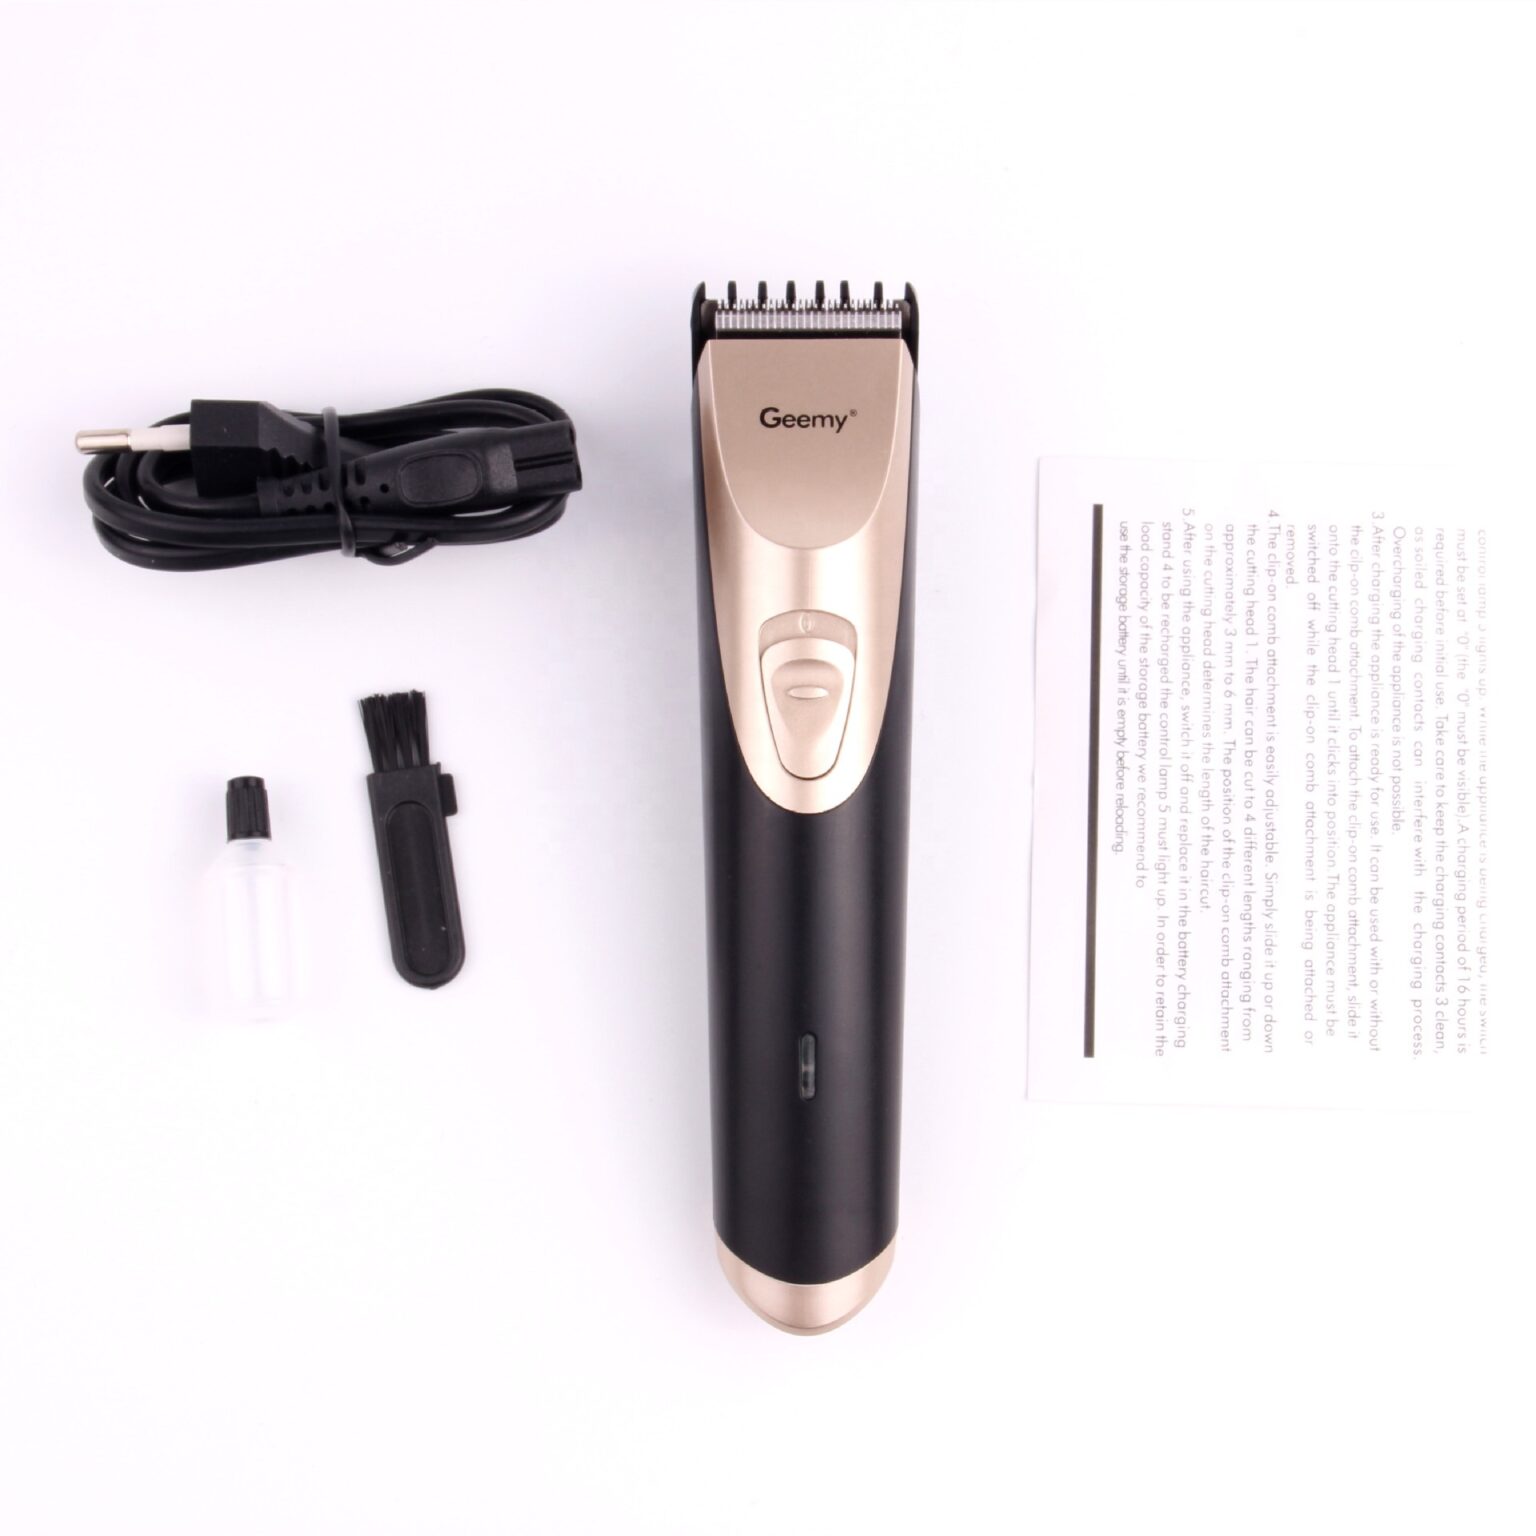 geemy-rechargeable-trimming-machine-for-men-model-gm-6576